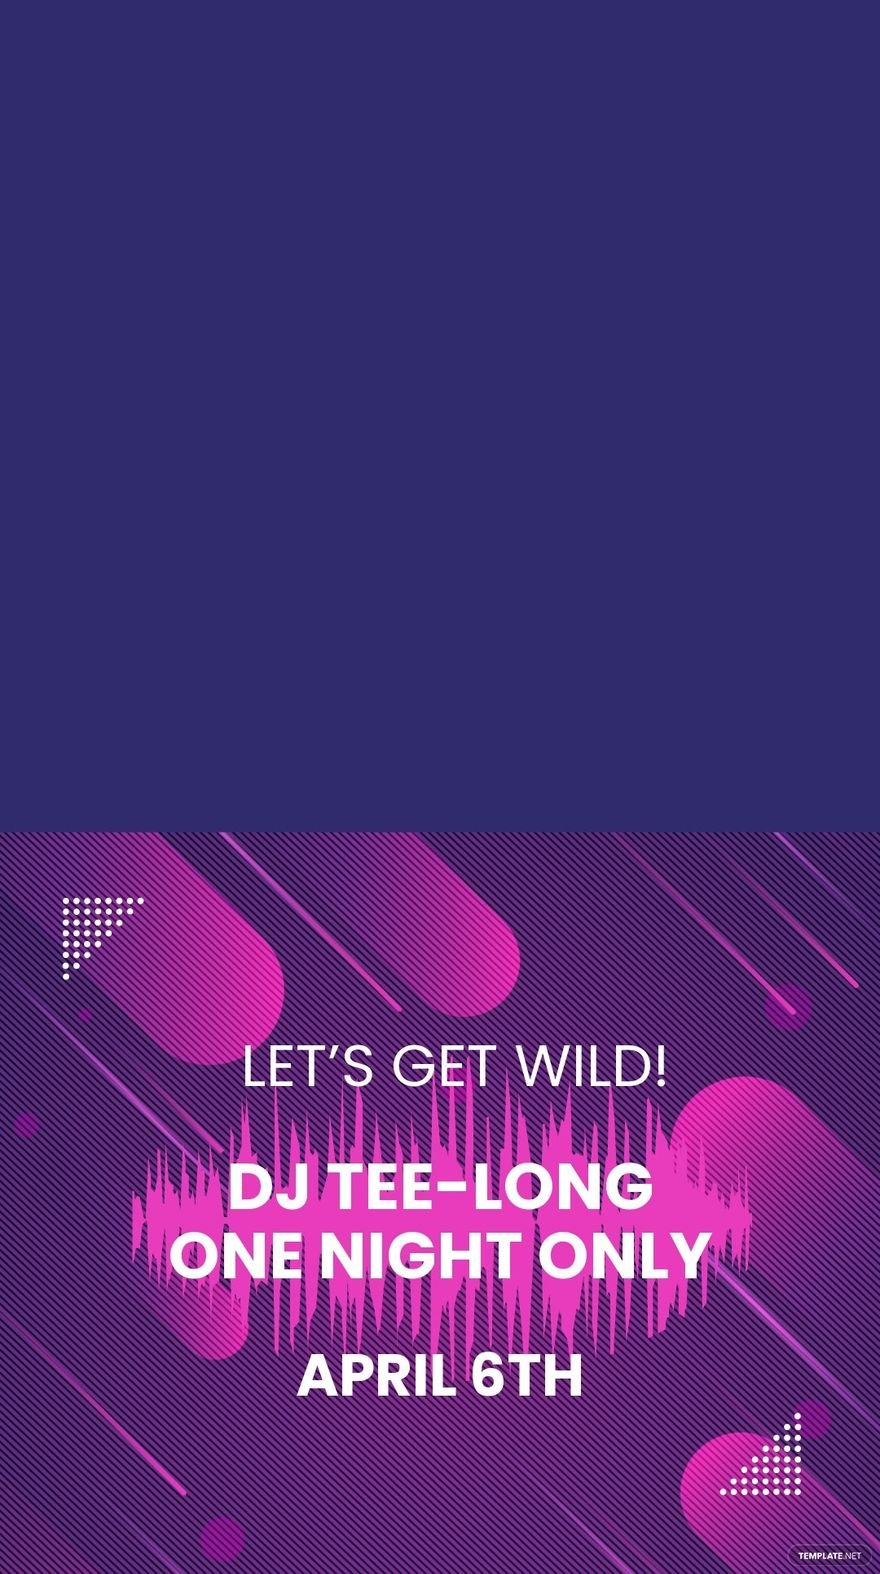 Free Dj Promotion Snapchat Geofilter Template